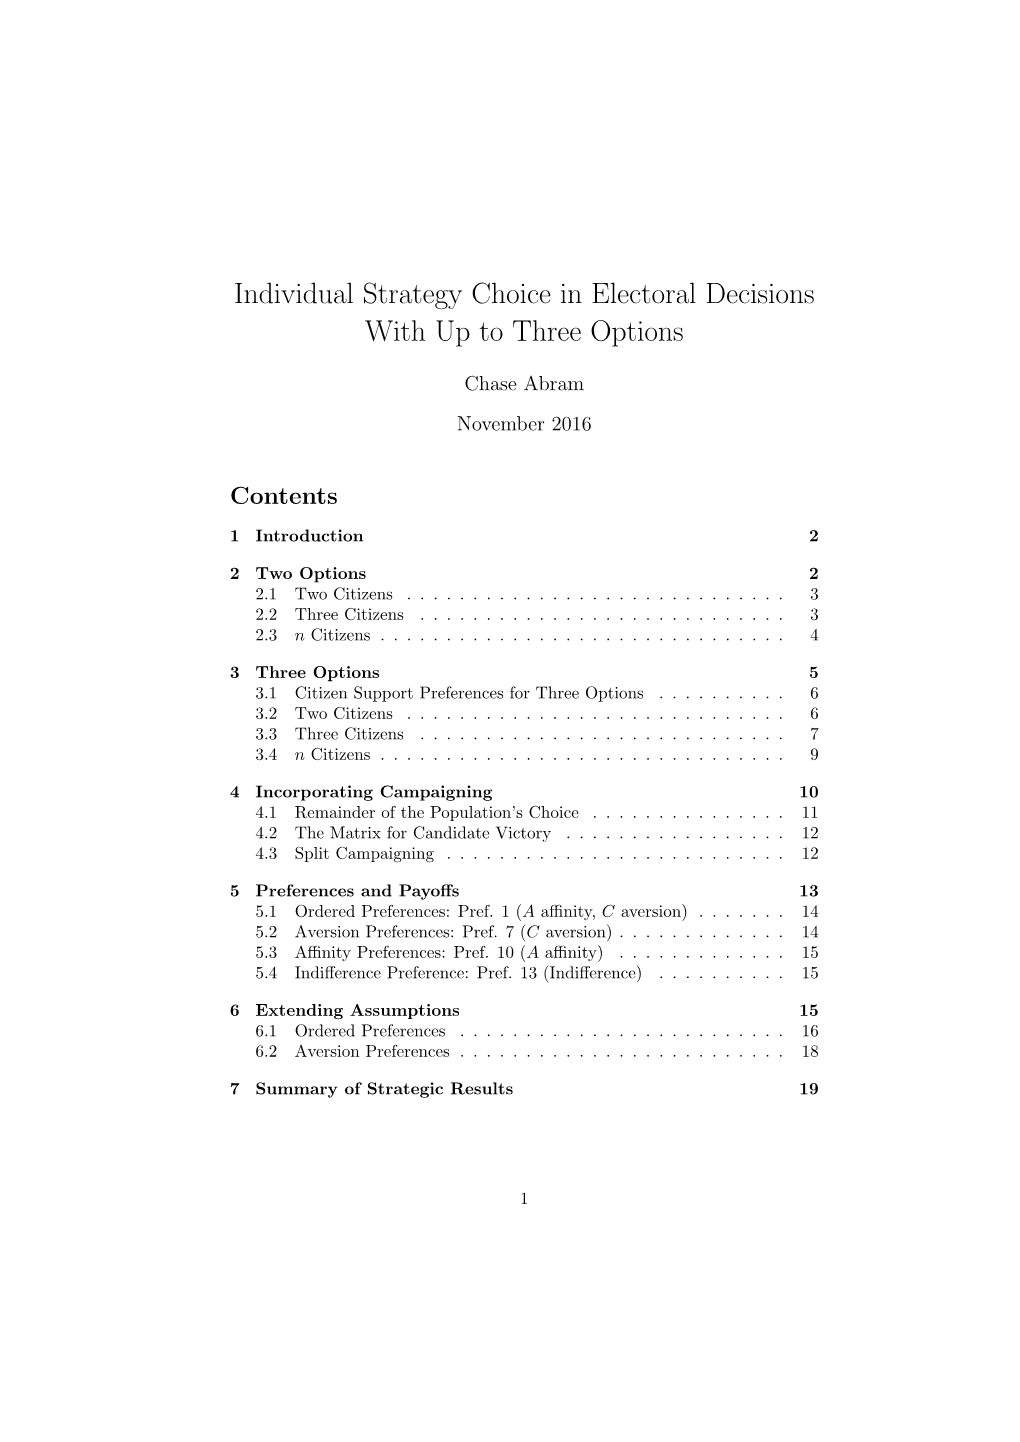 Individual Strategy Choice in Electoral Decisions with up to Three Options